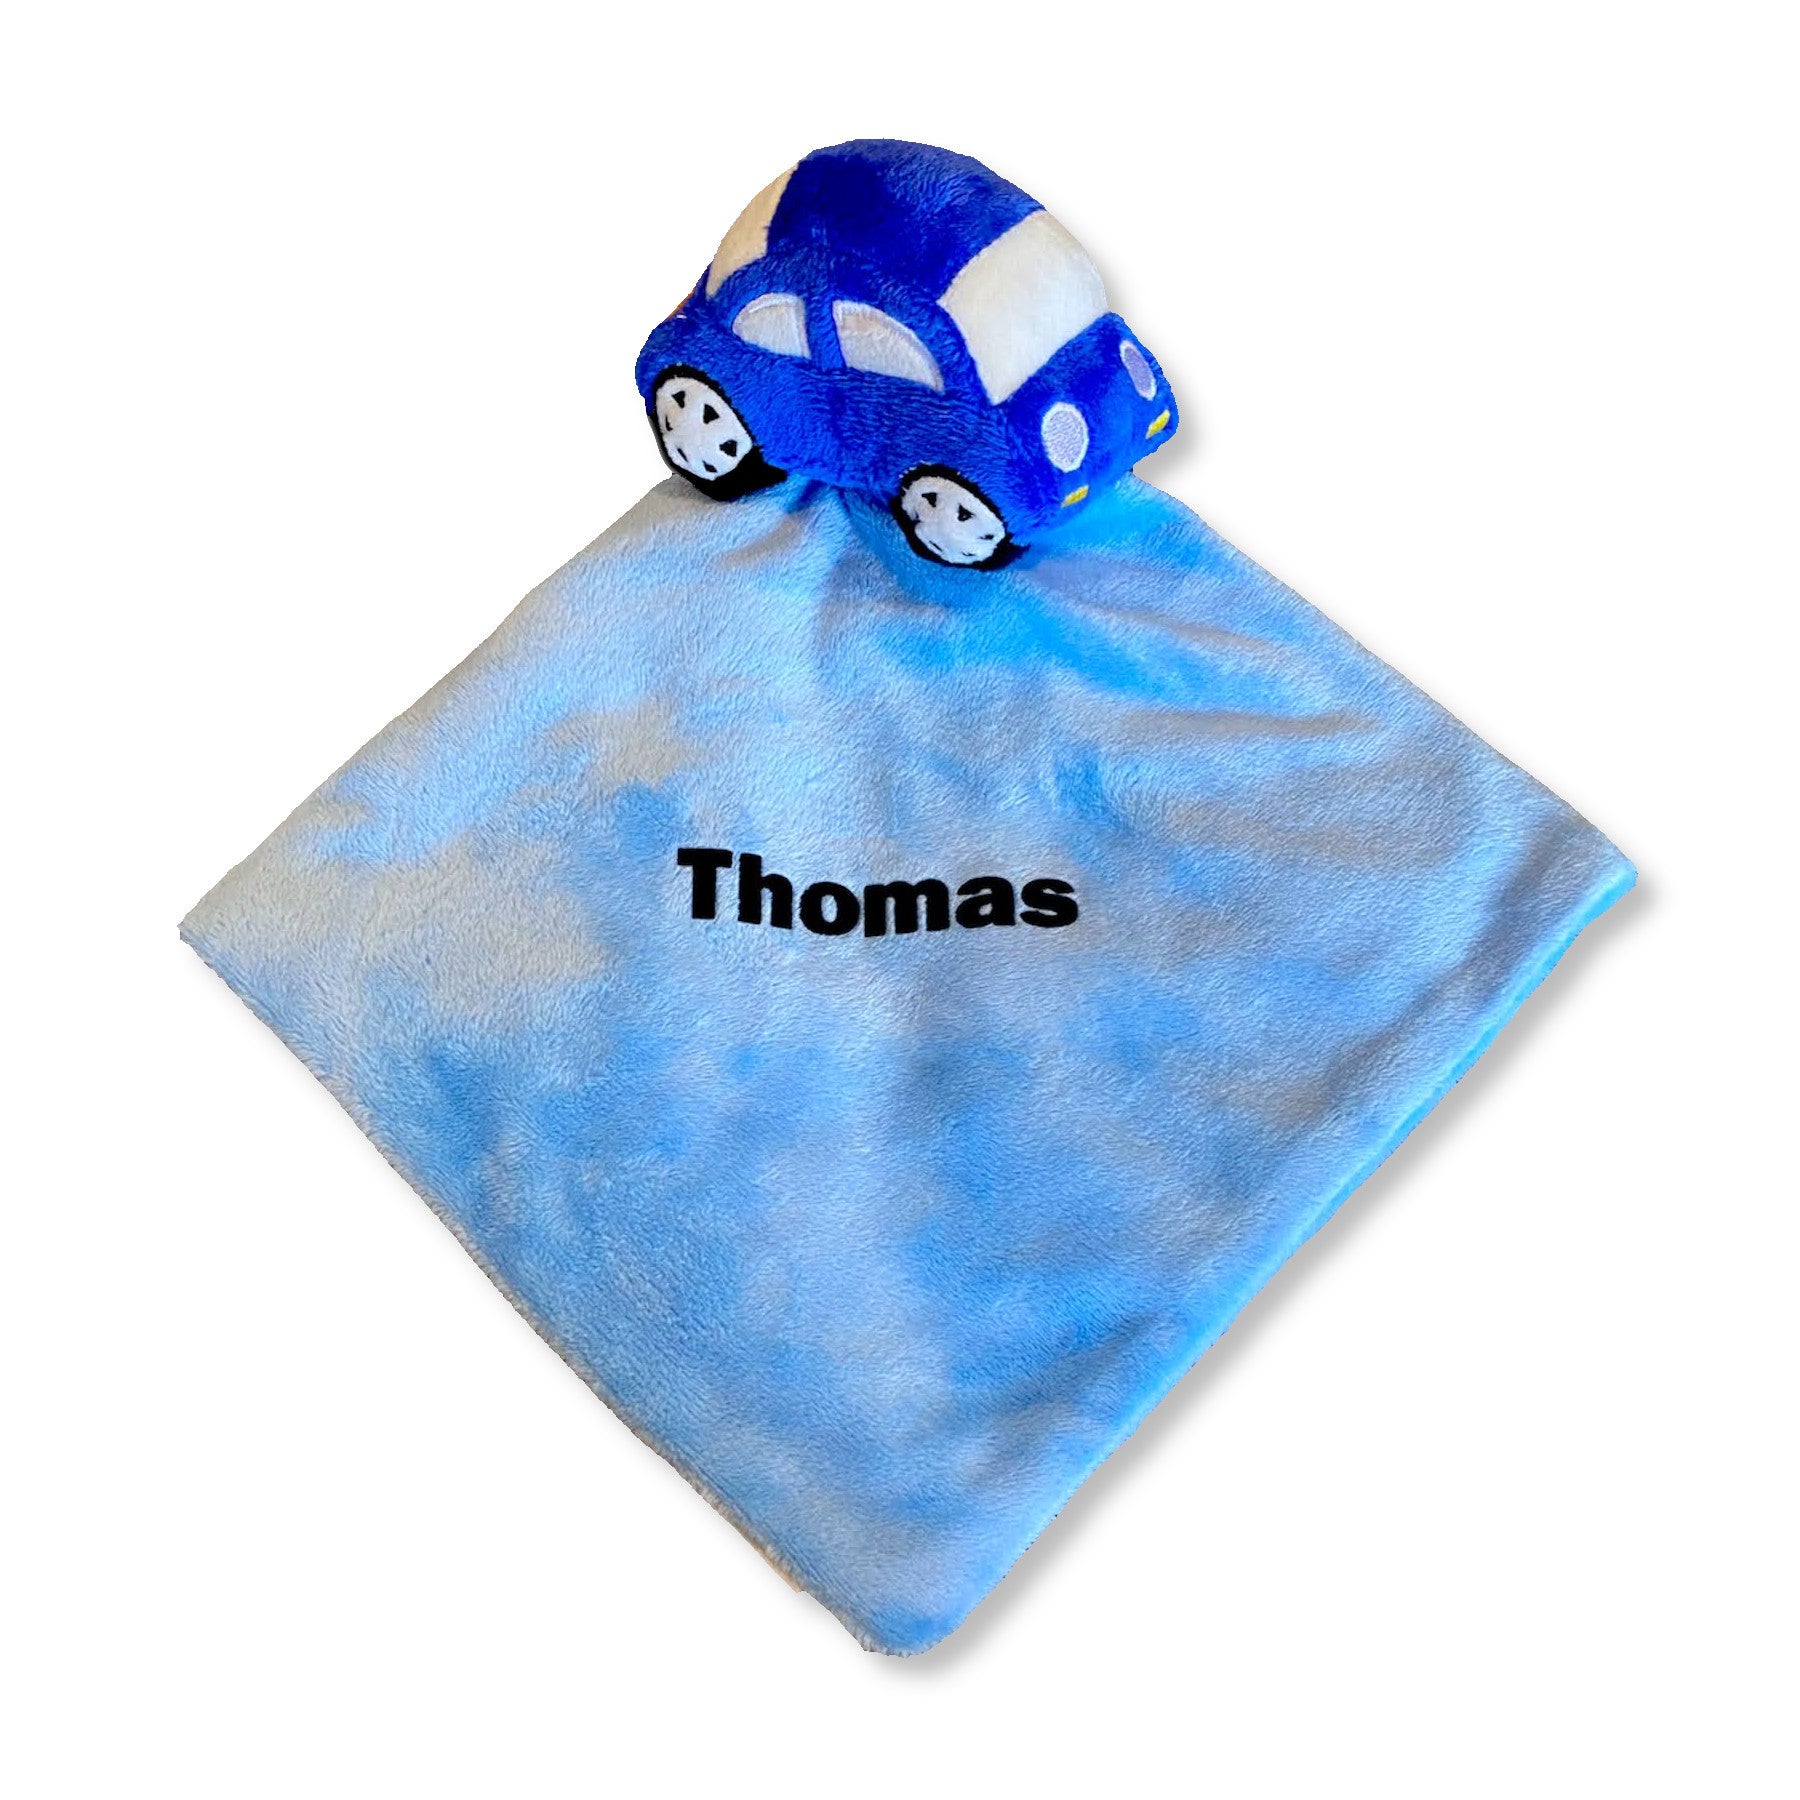 Soft car-themed baby comforter customised for your little one